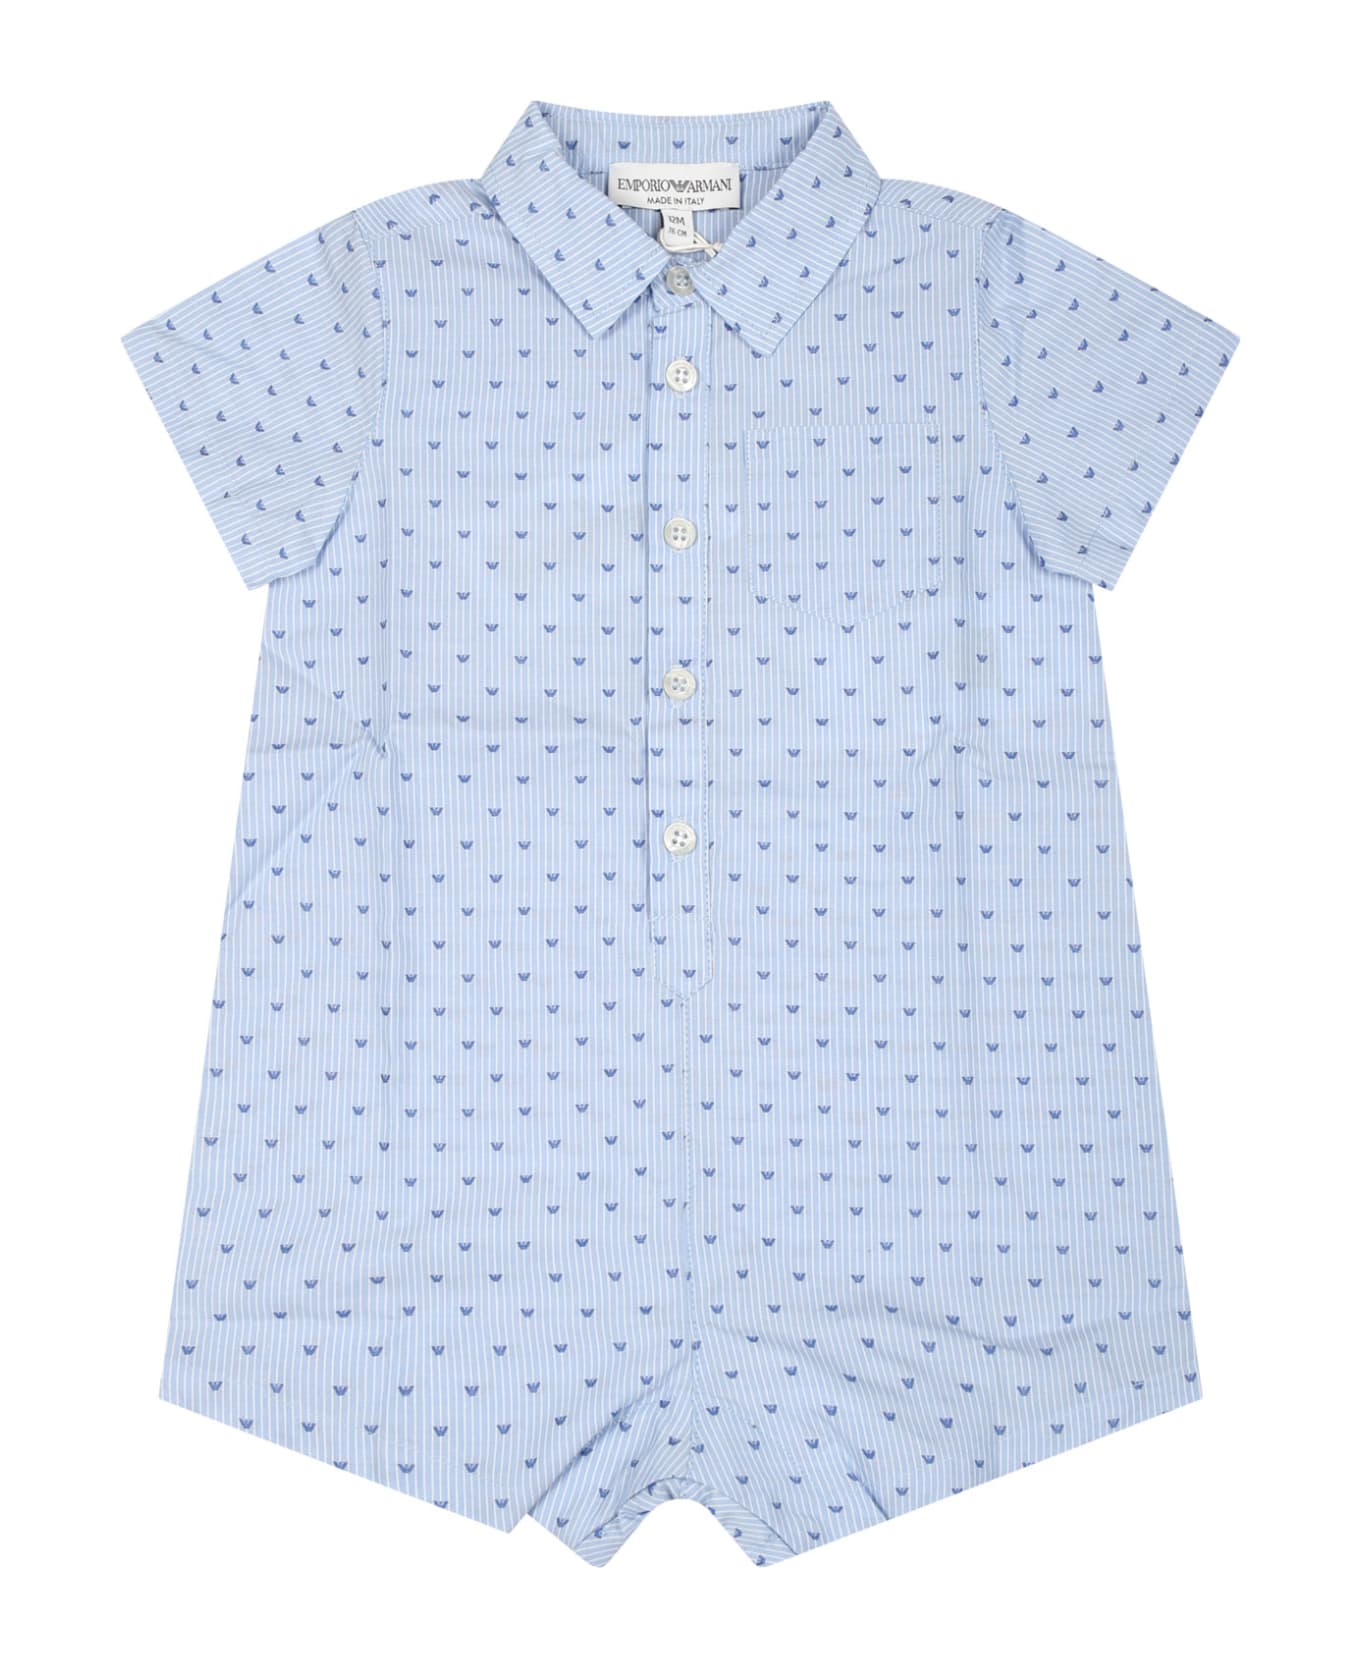 Emporio Armani Light Blue Cotton Romper For Baby Boy With Eagle - Light Blue